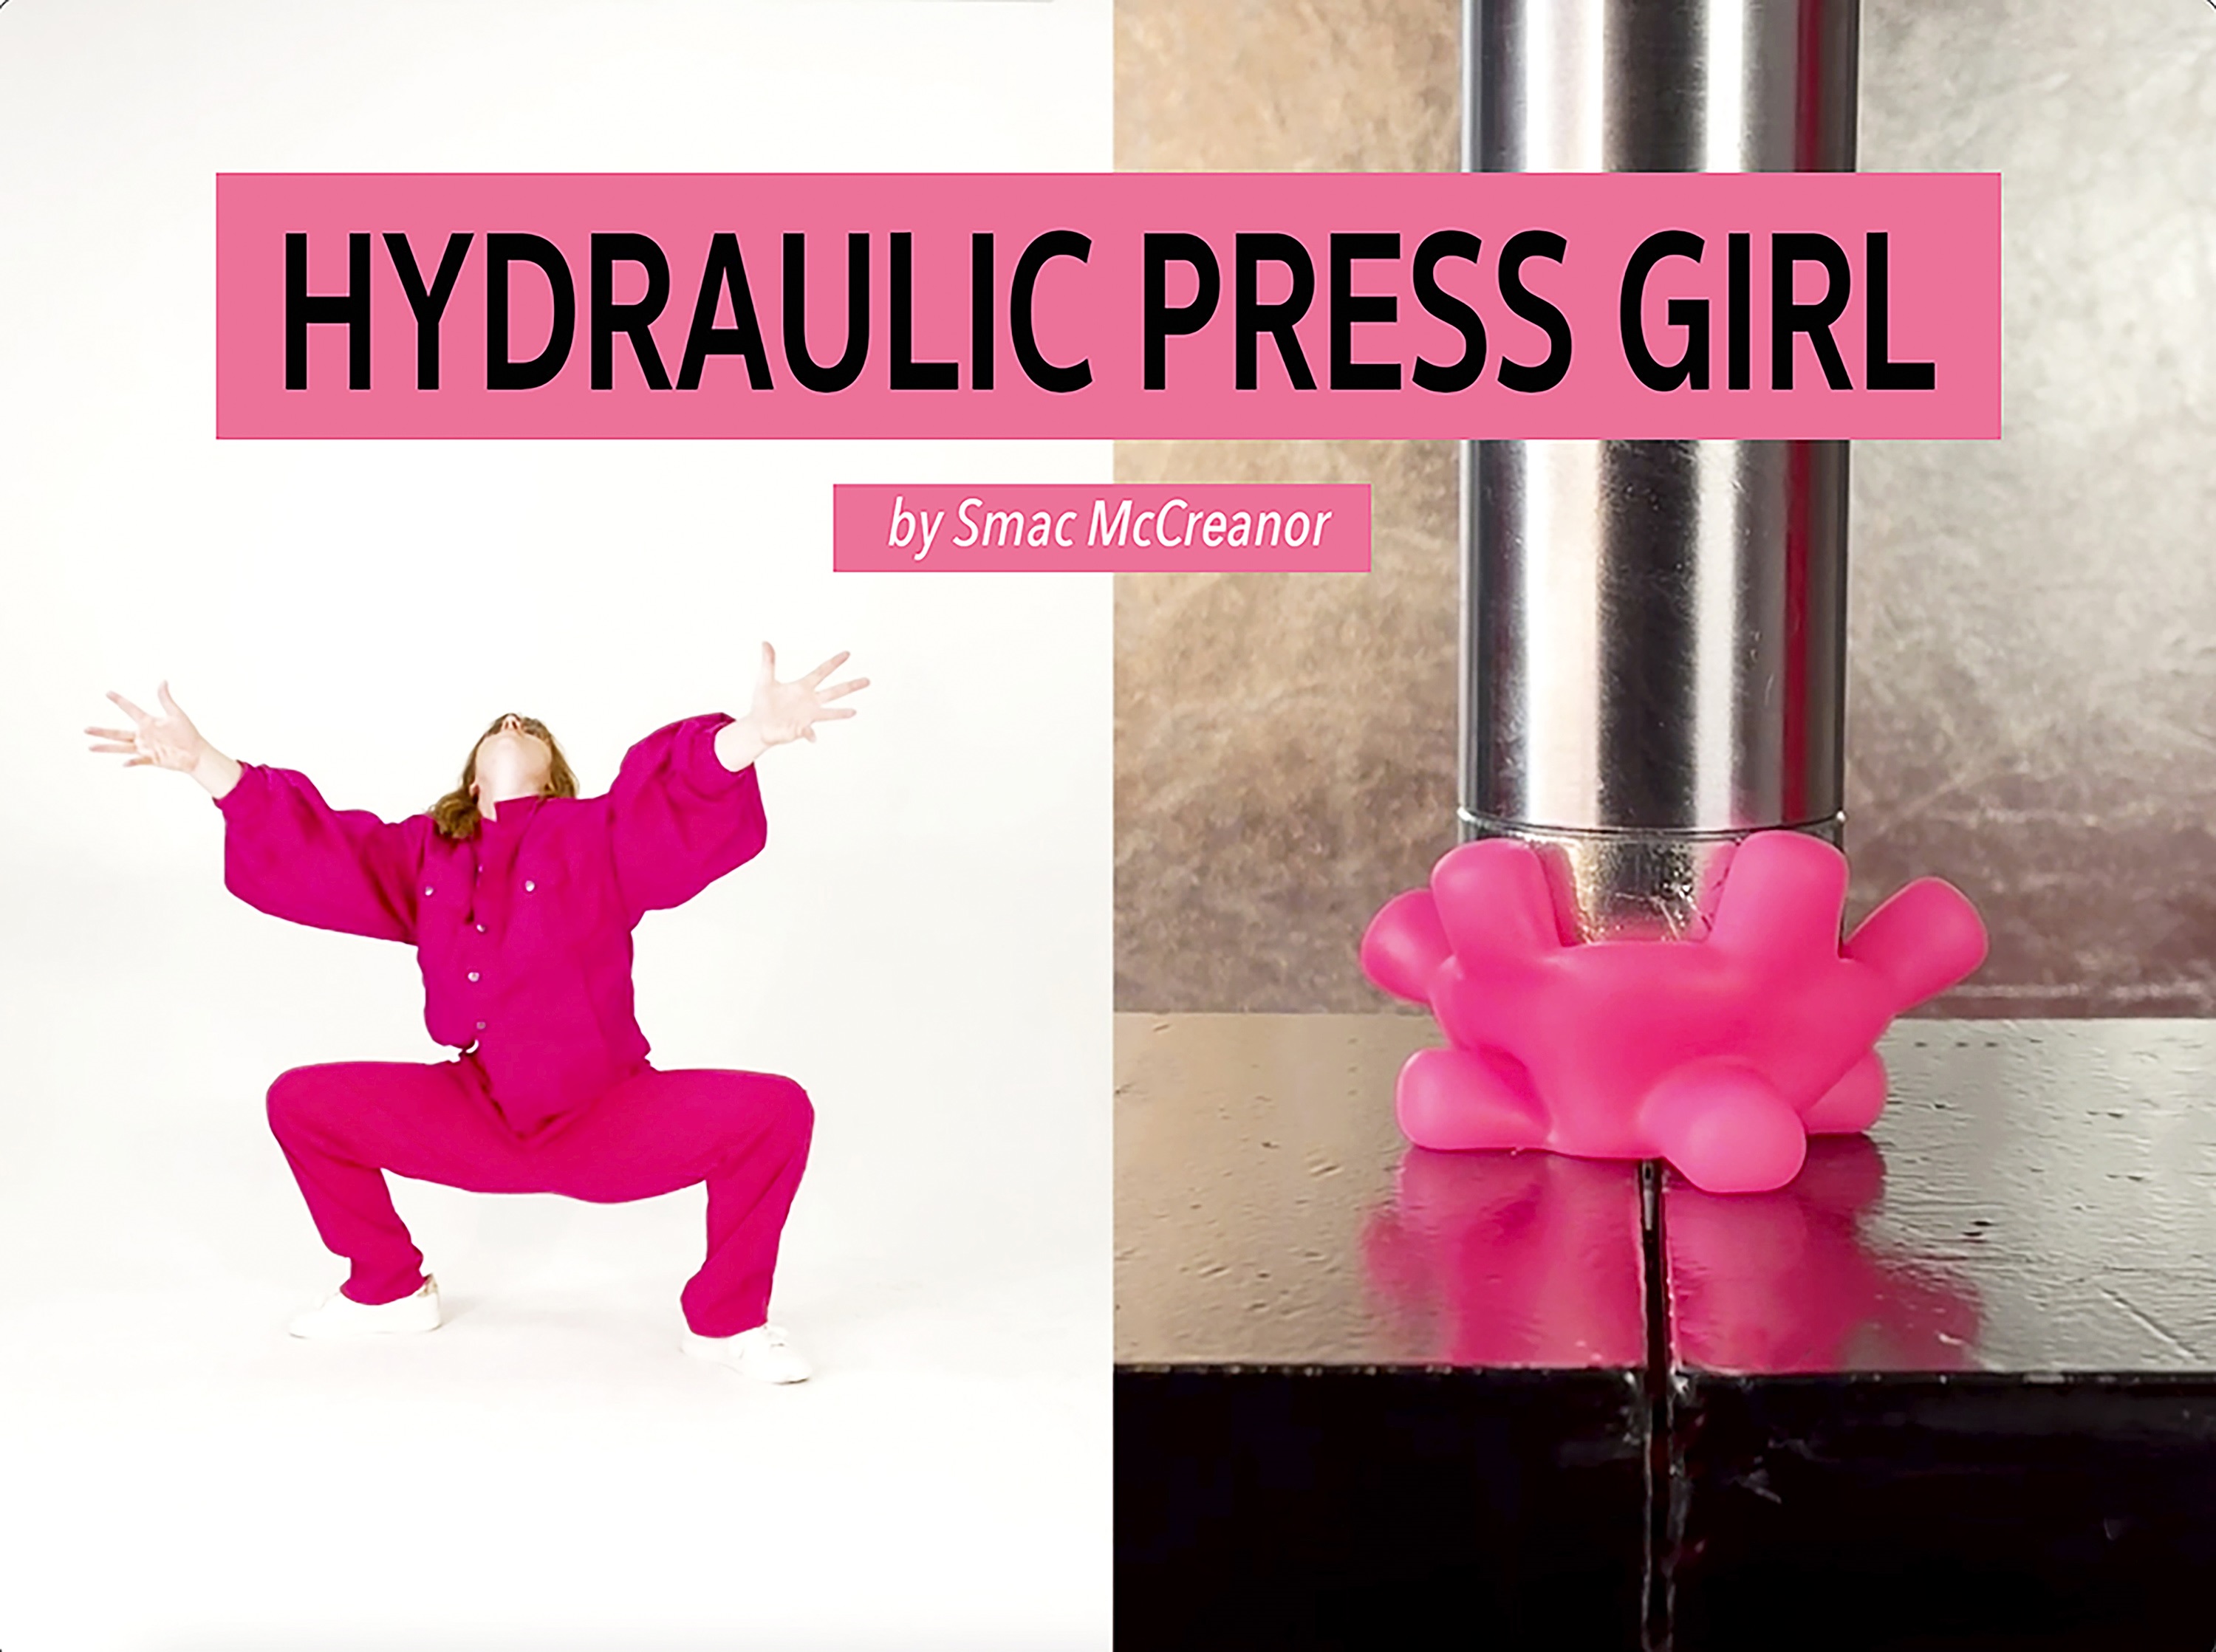 A still from a side-by-side video showing a hydraulic press crushing a pink toy on the right and a woman in pink on left